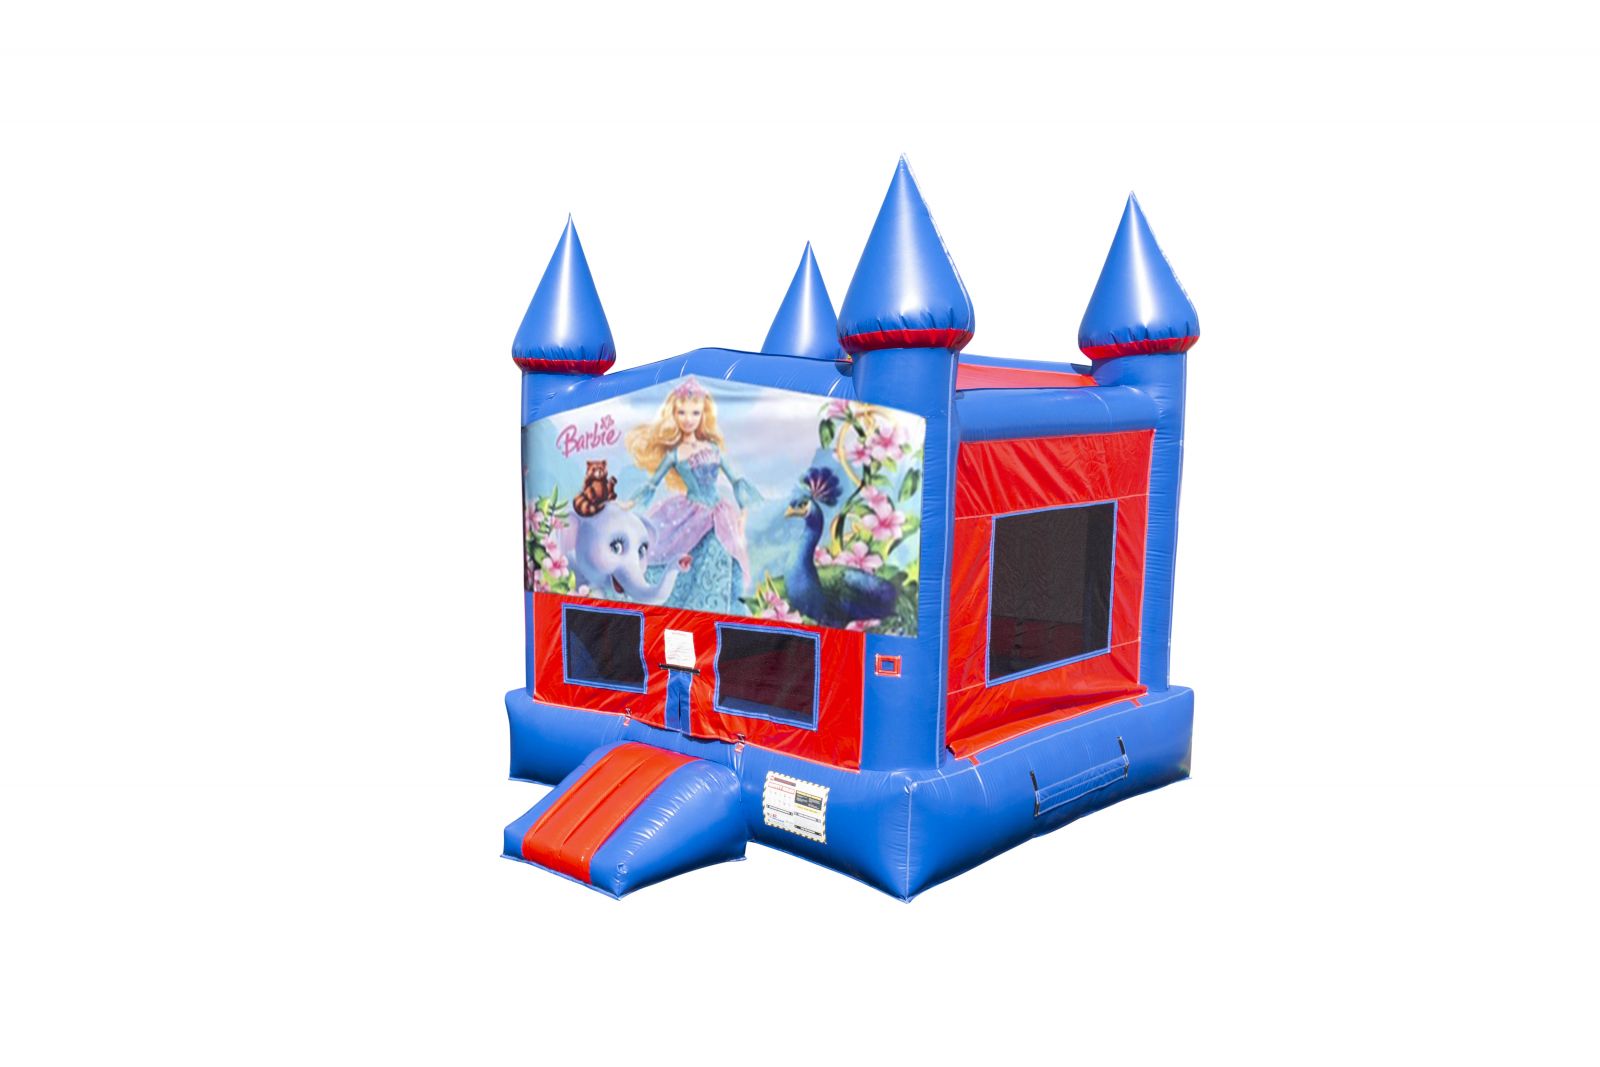 Barbie Red and Blue Bounce House Right side and Front